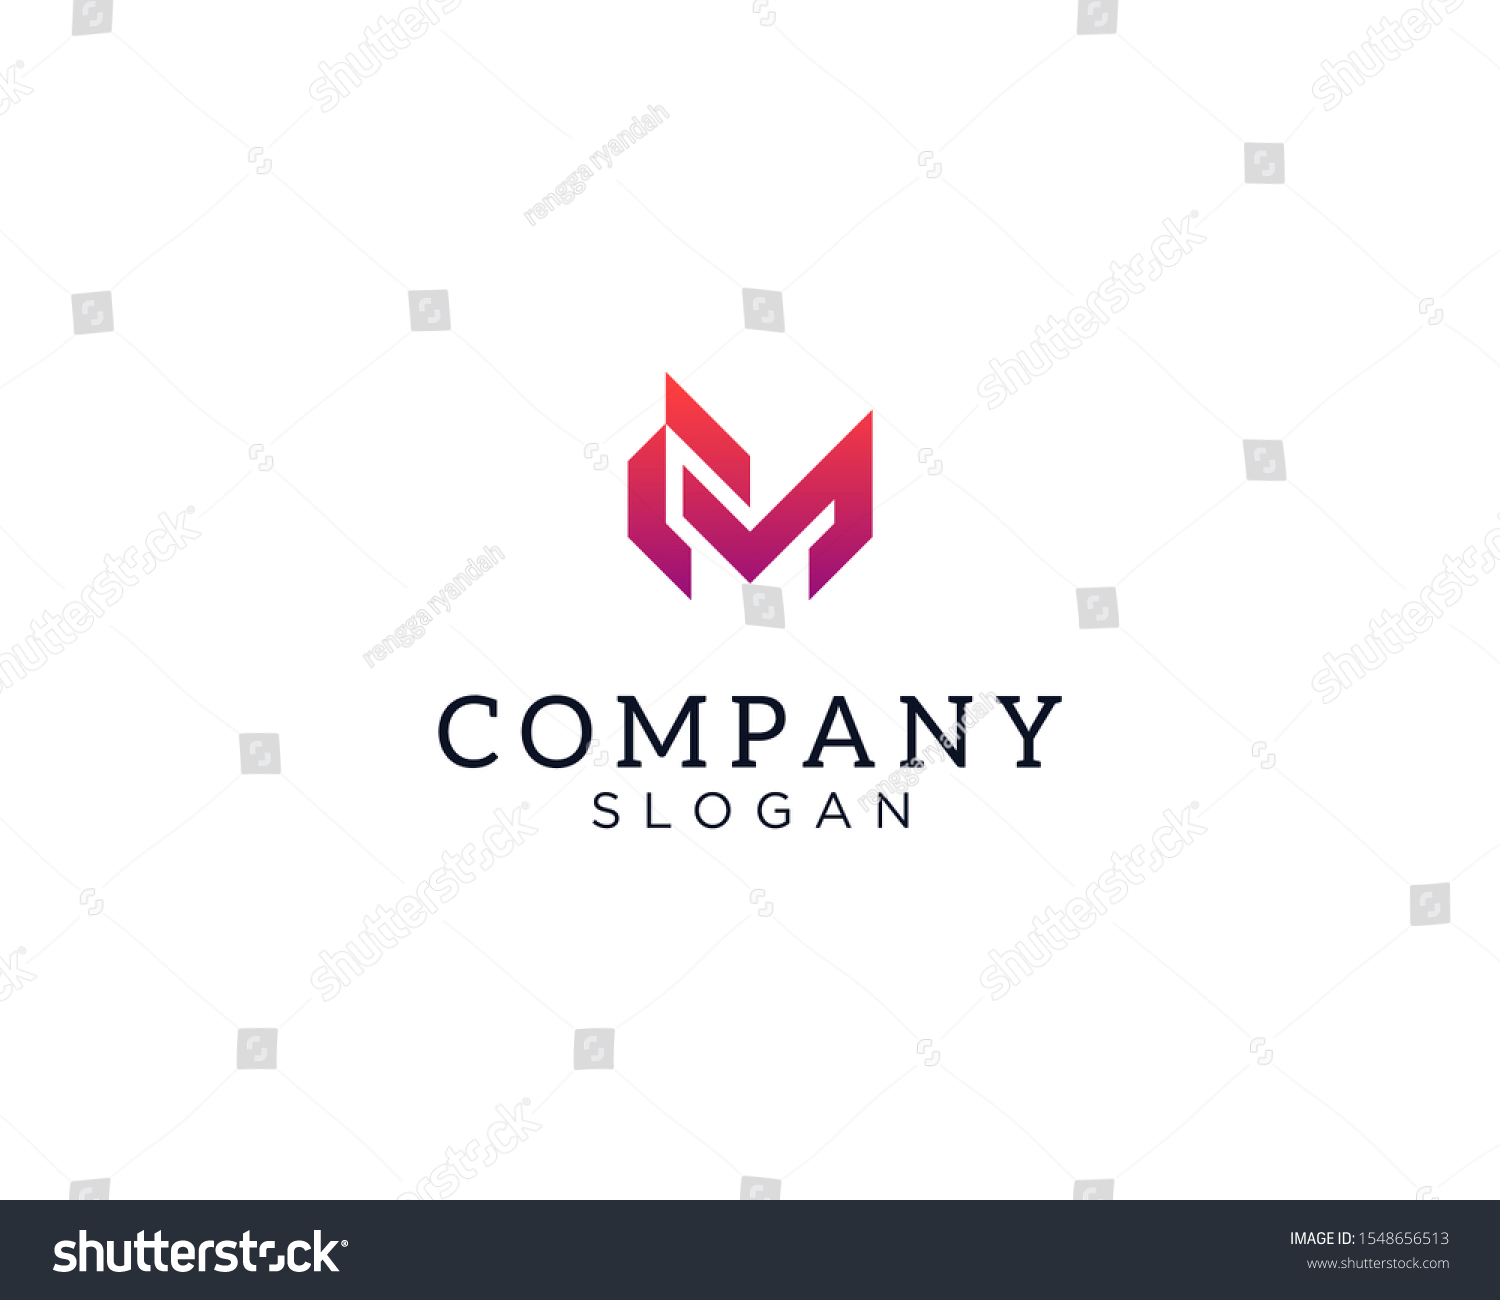 SVG of alphabet logo that combines 2 letters into one logo / symbol that is unique and original. consists of letters C and M. editable and easy to custom svg